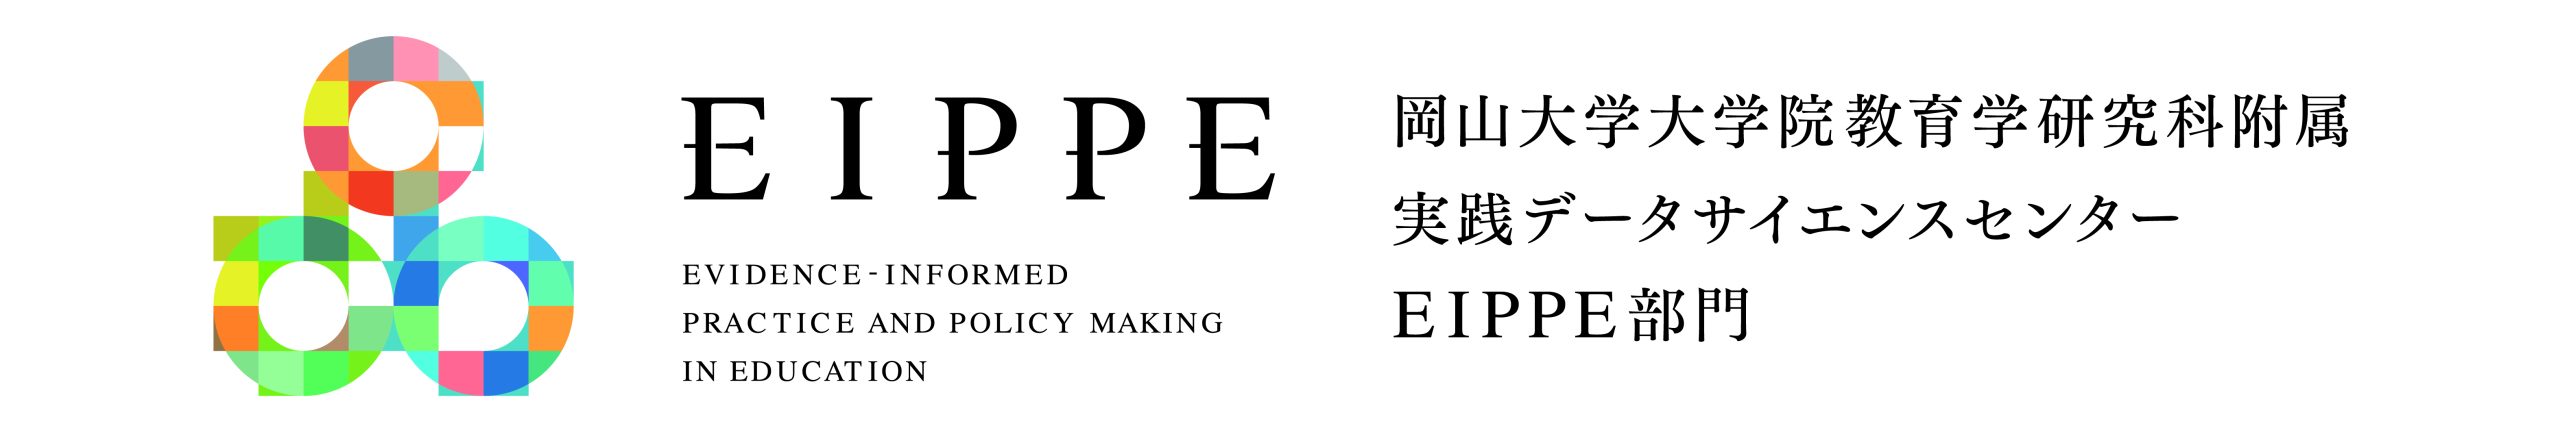 EIPPE